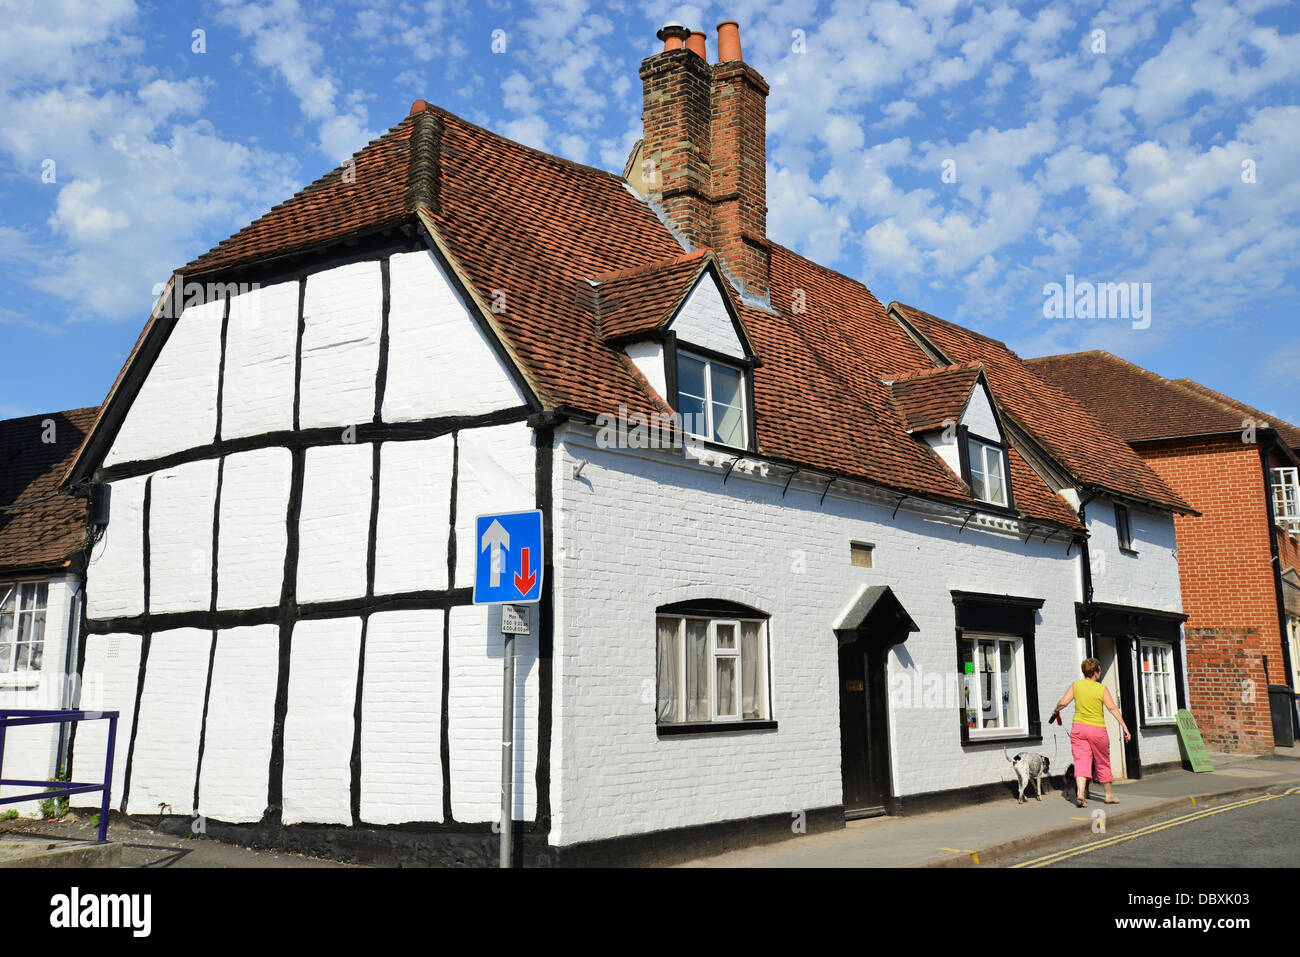 Period cottage in High Street, Goring-on-Thames, Oxfordshire, England, United Kingdom Stock Photo